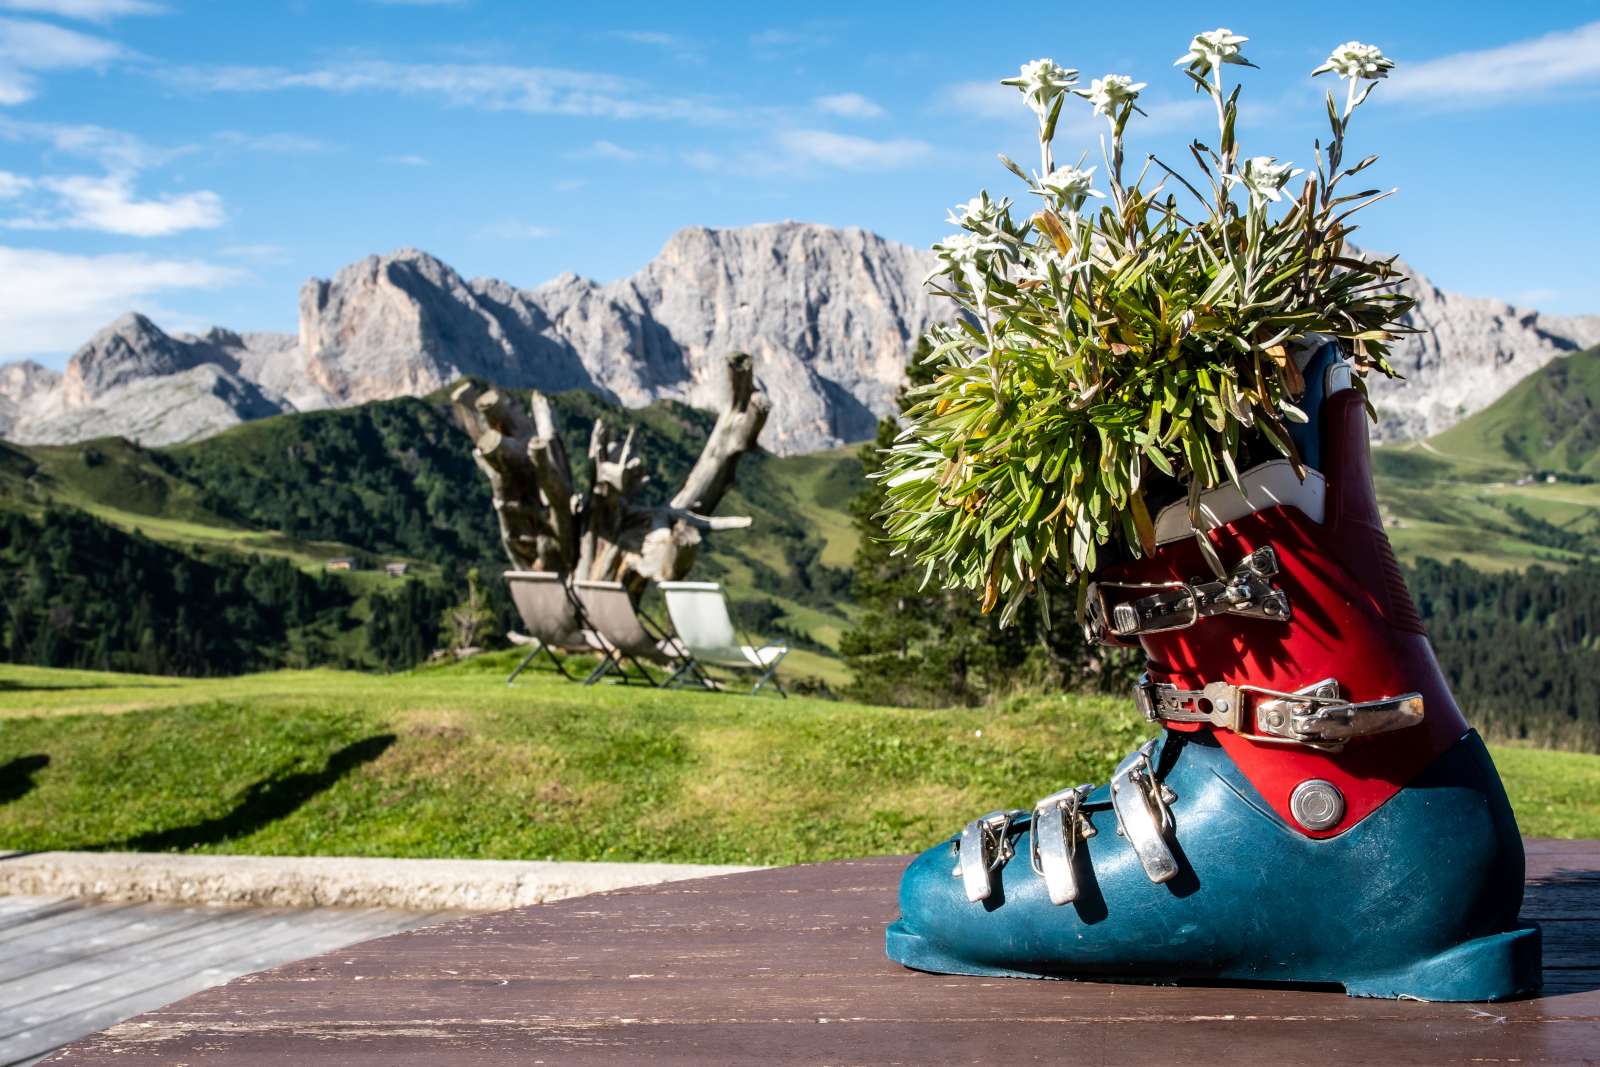 Ski boot with flowers in it on outdoor bench